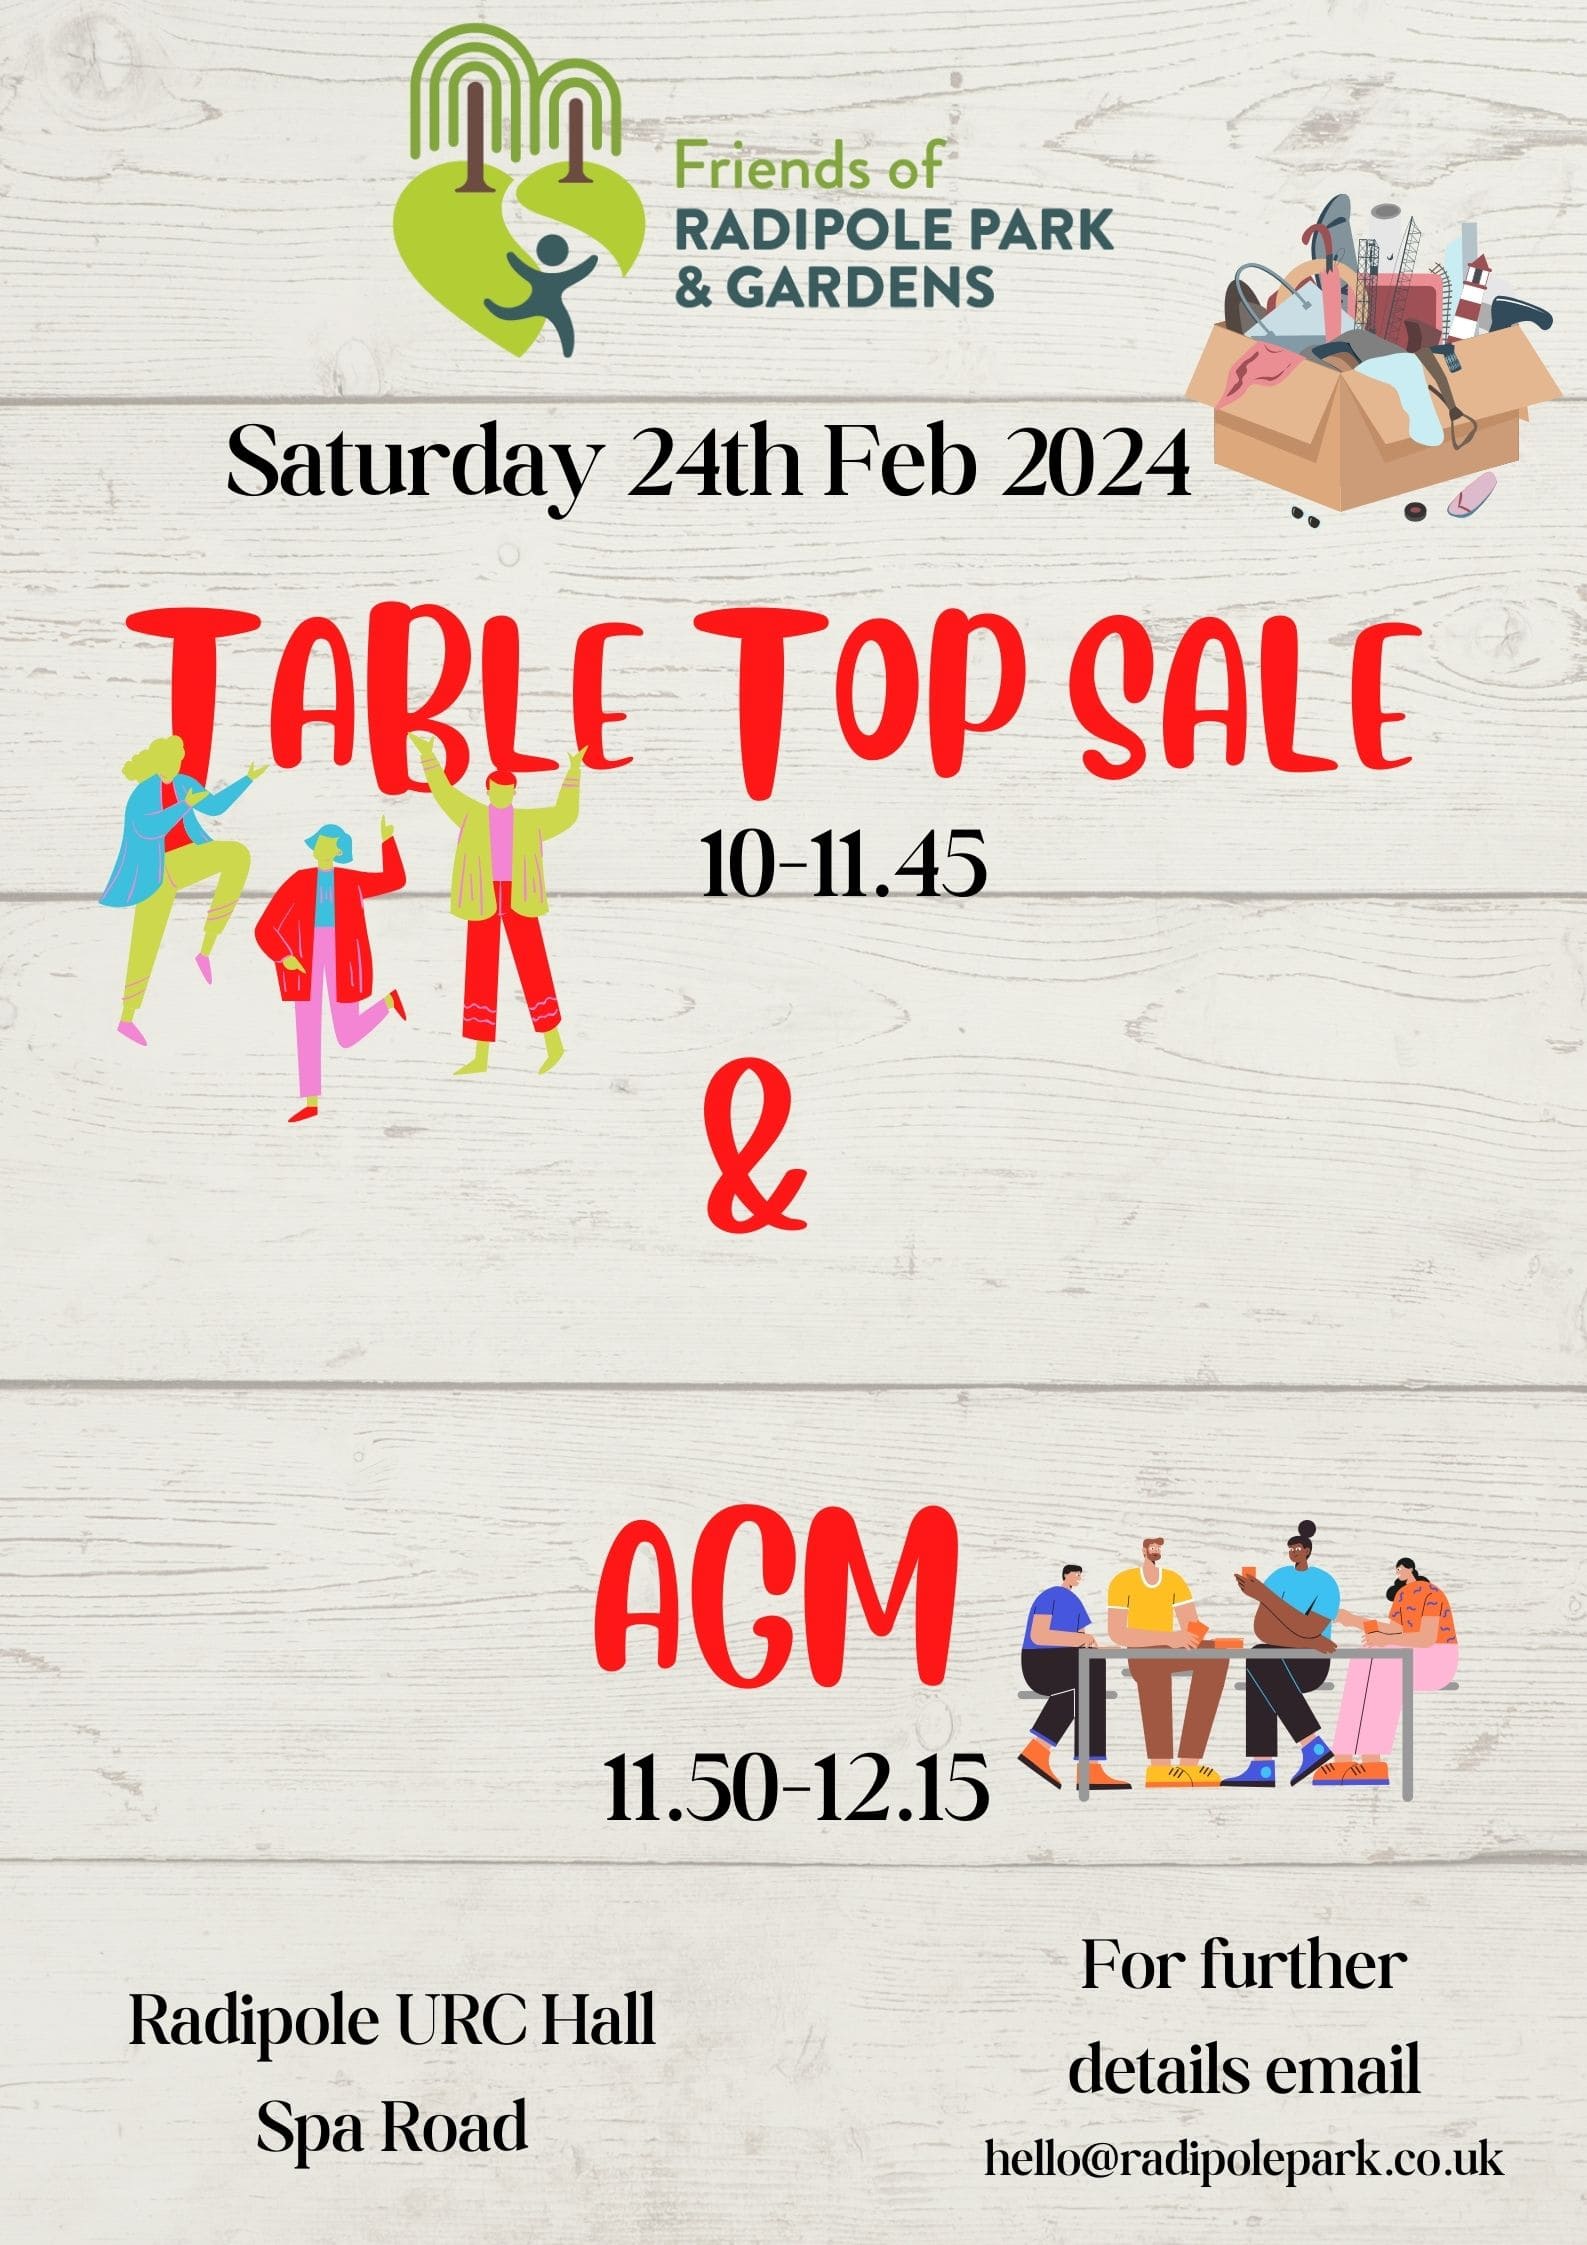 Friends of Radipole park table top sale